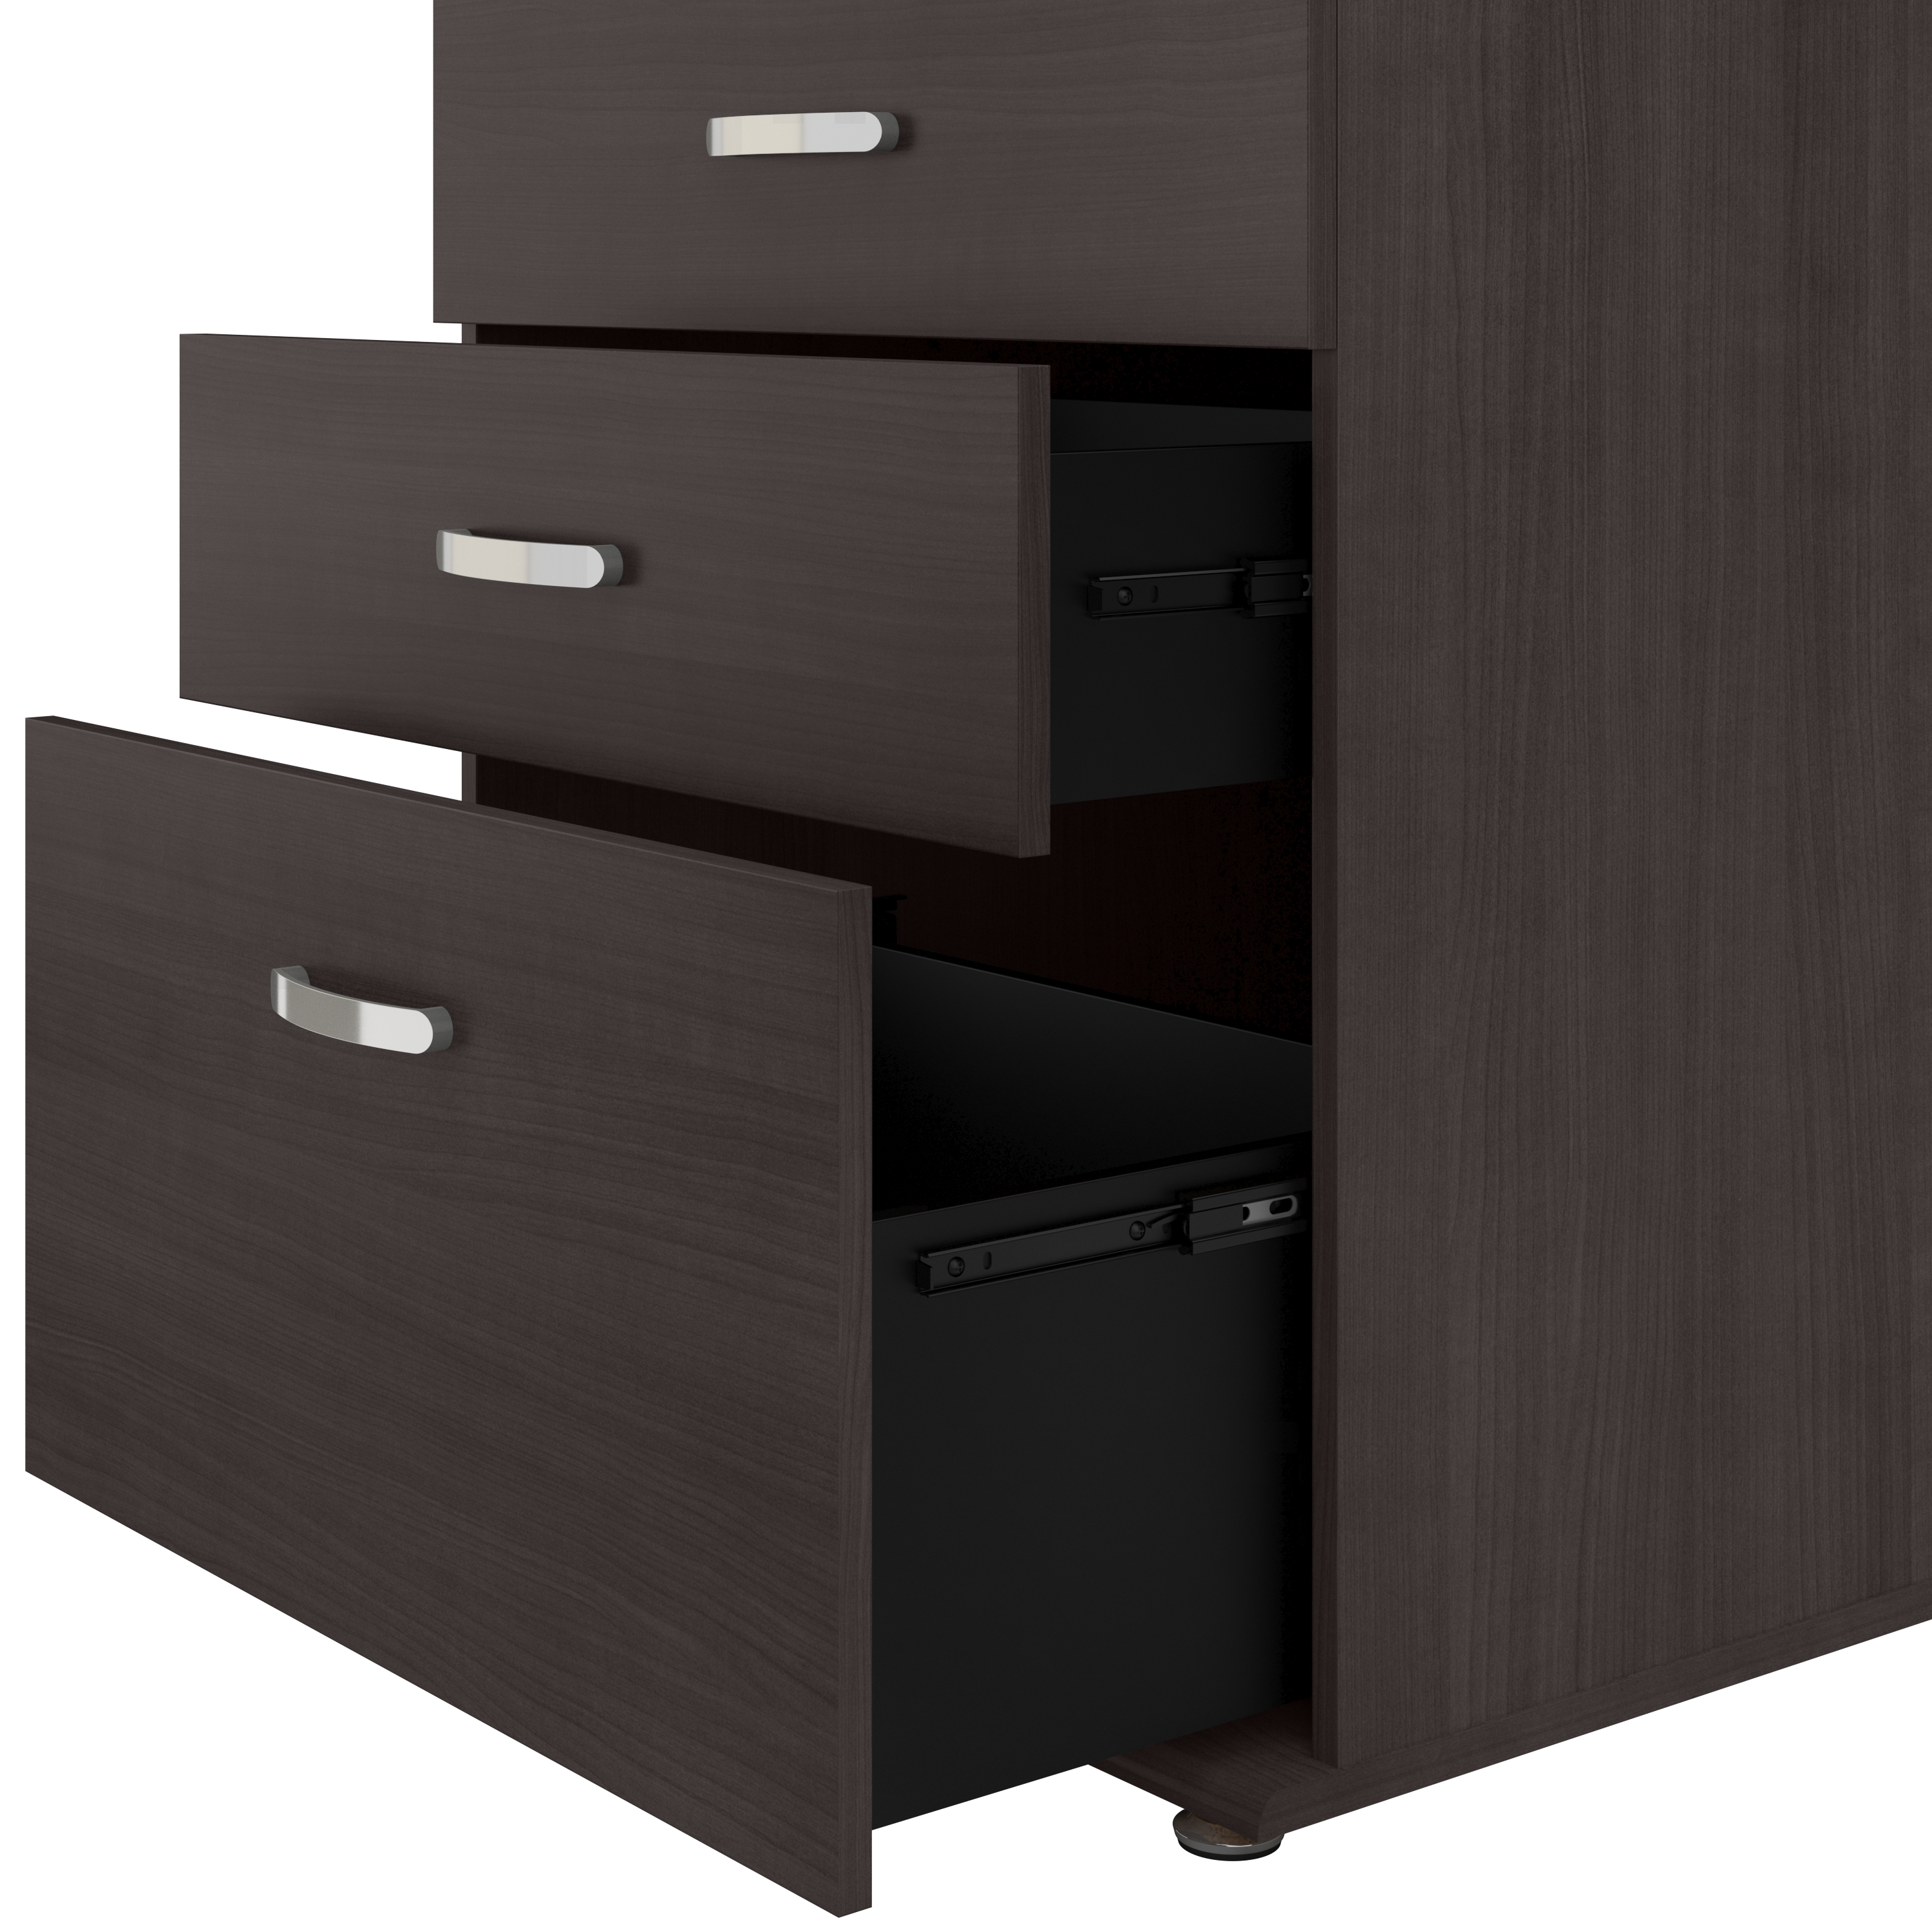 Shop Bush Business Furniture Universal Floor Storage Cabinet with Drawers 03 UNS328SG #color_storm gray